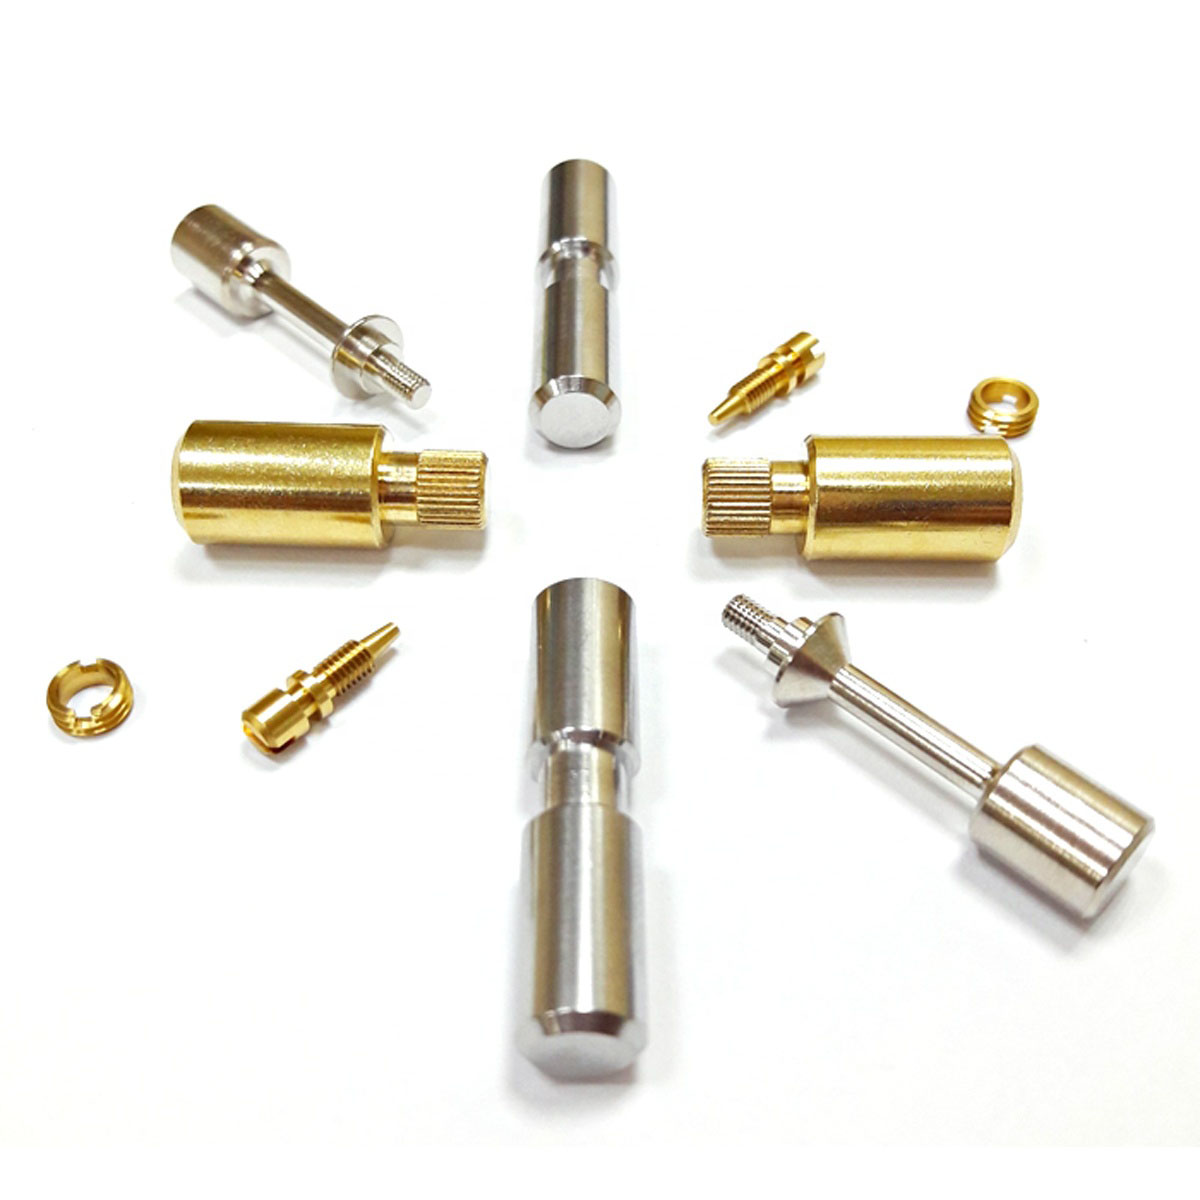 CNC turned parts 